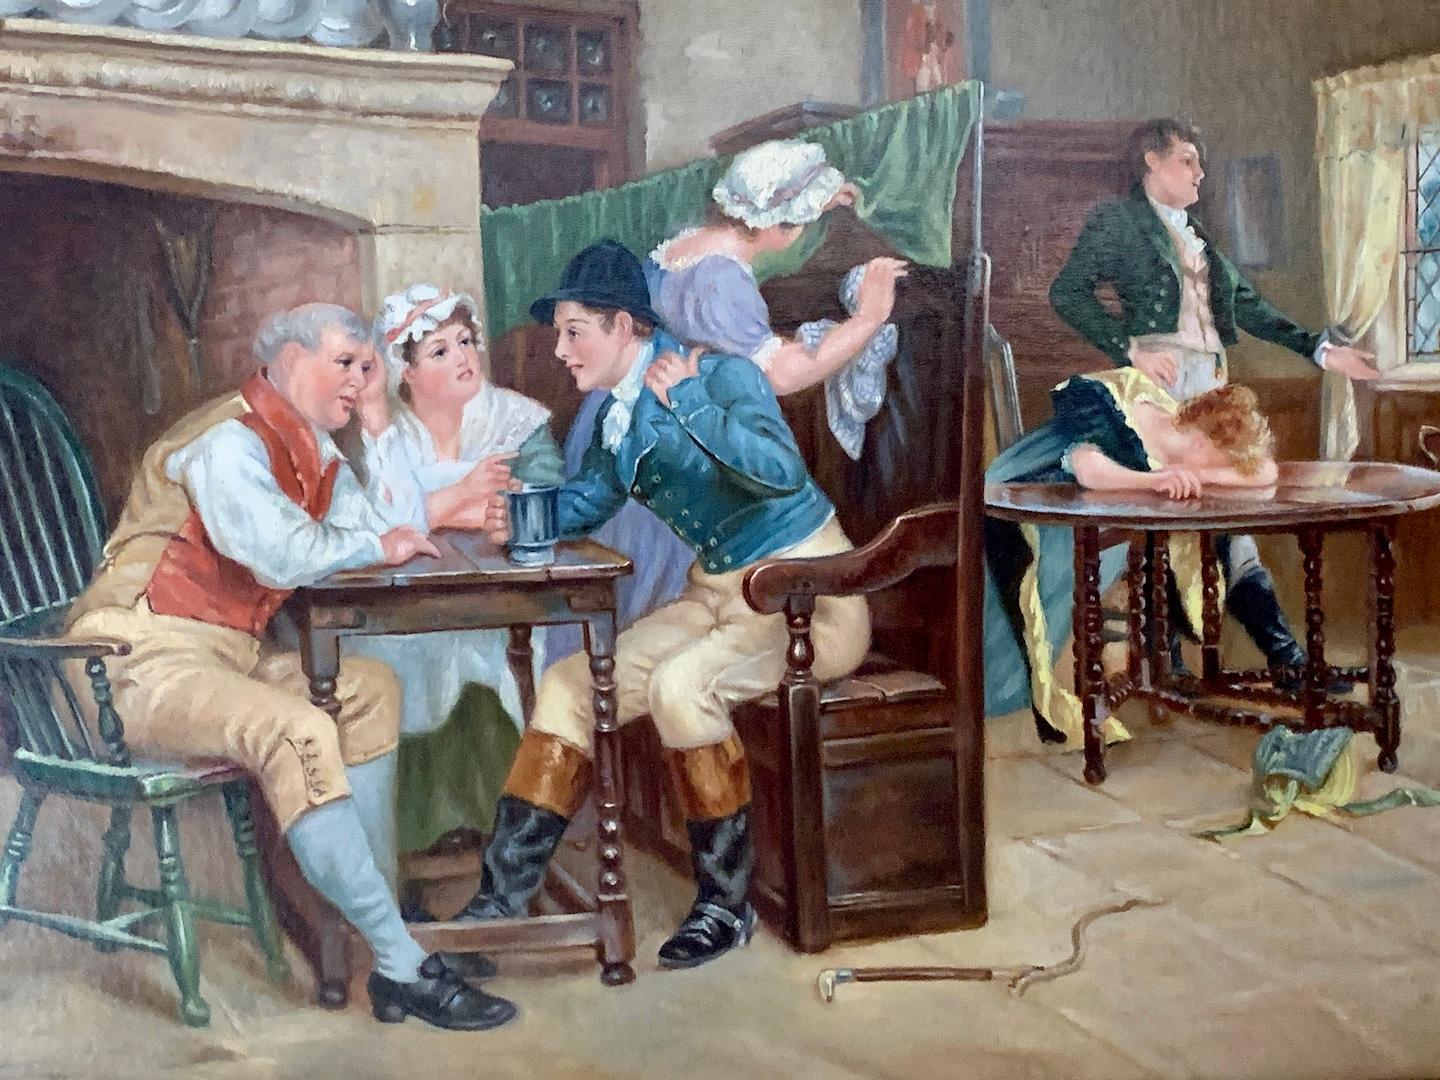 !9th century English Pub interior , with Huntsmen and figures drinking - Painting by Randolph Caldecott